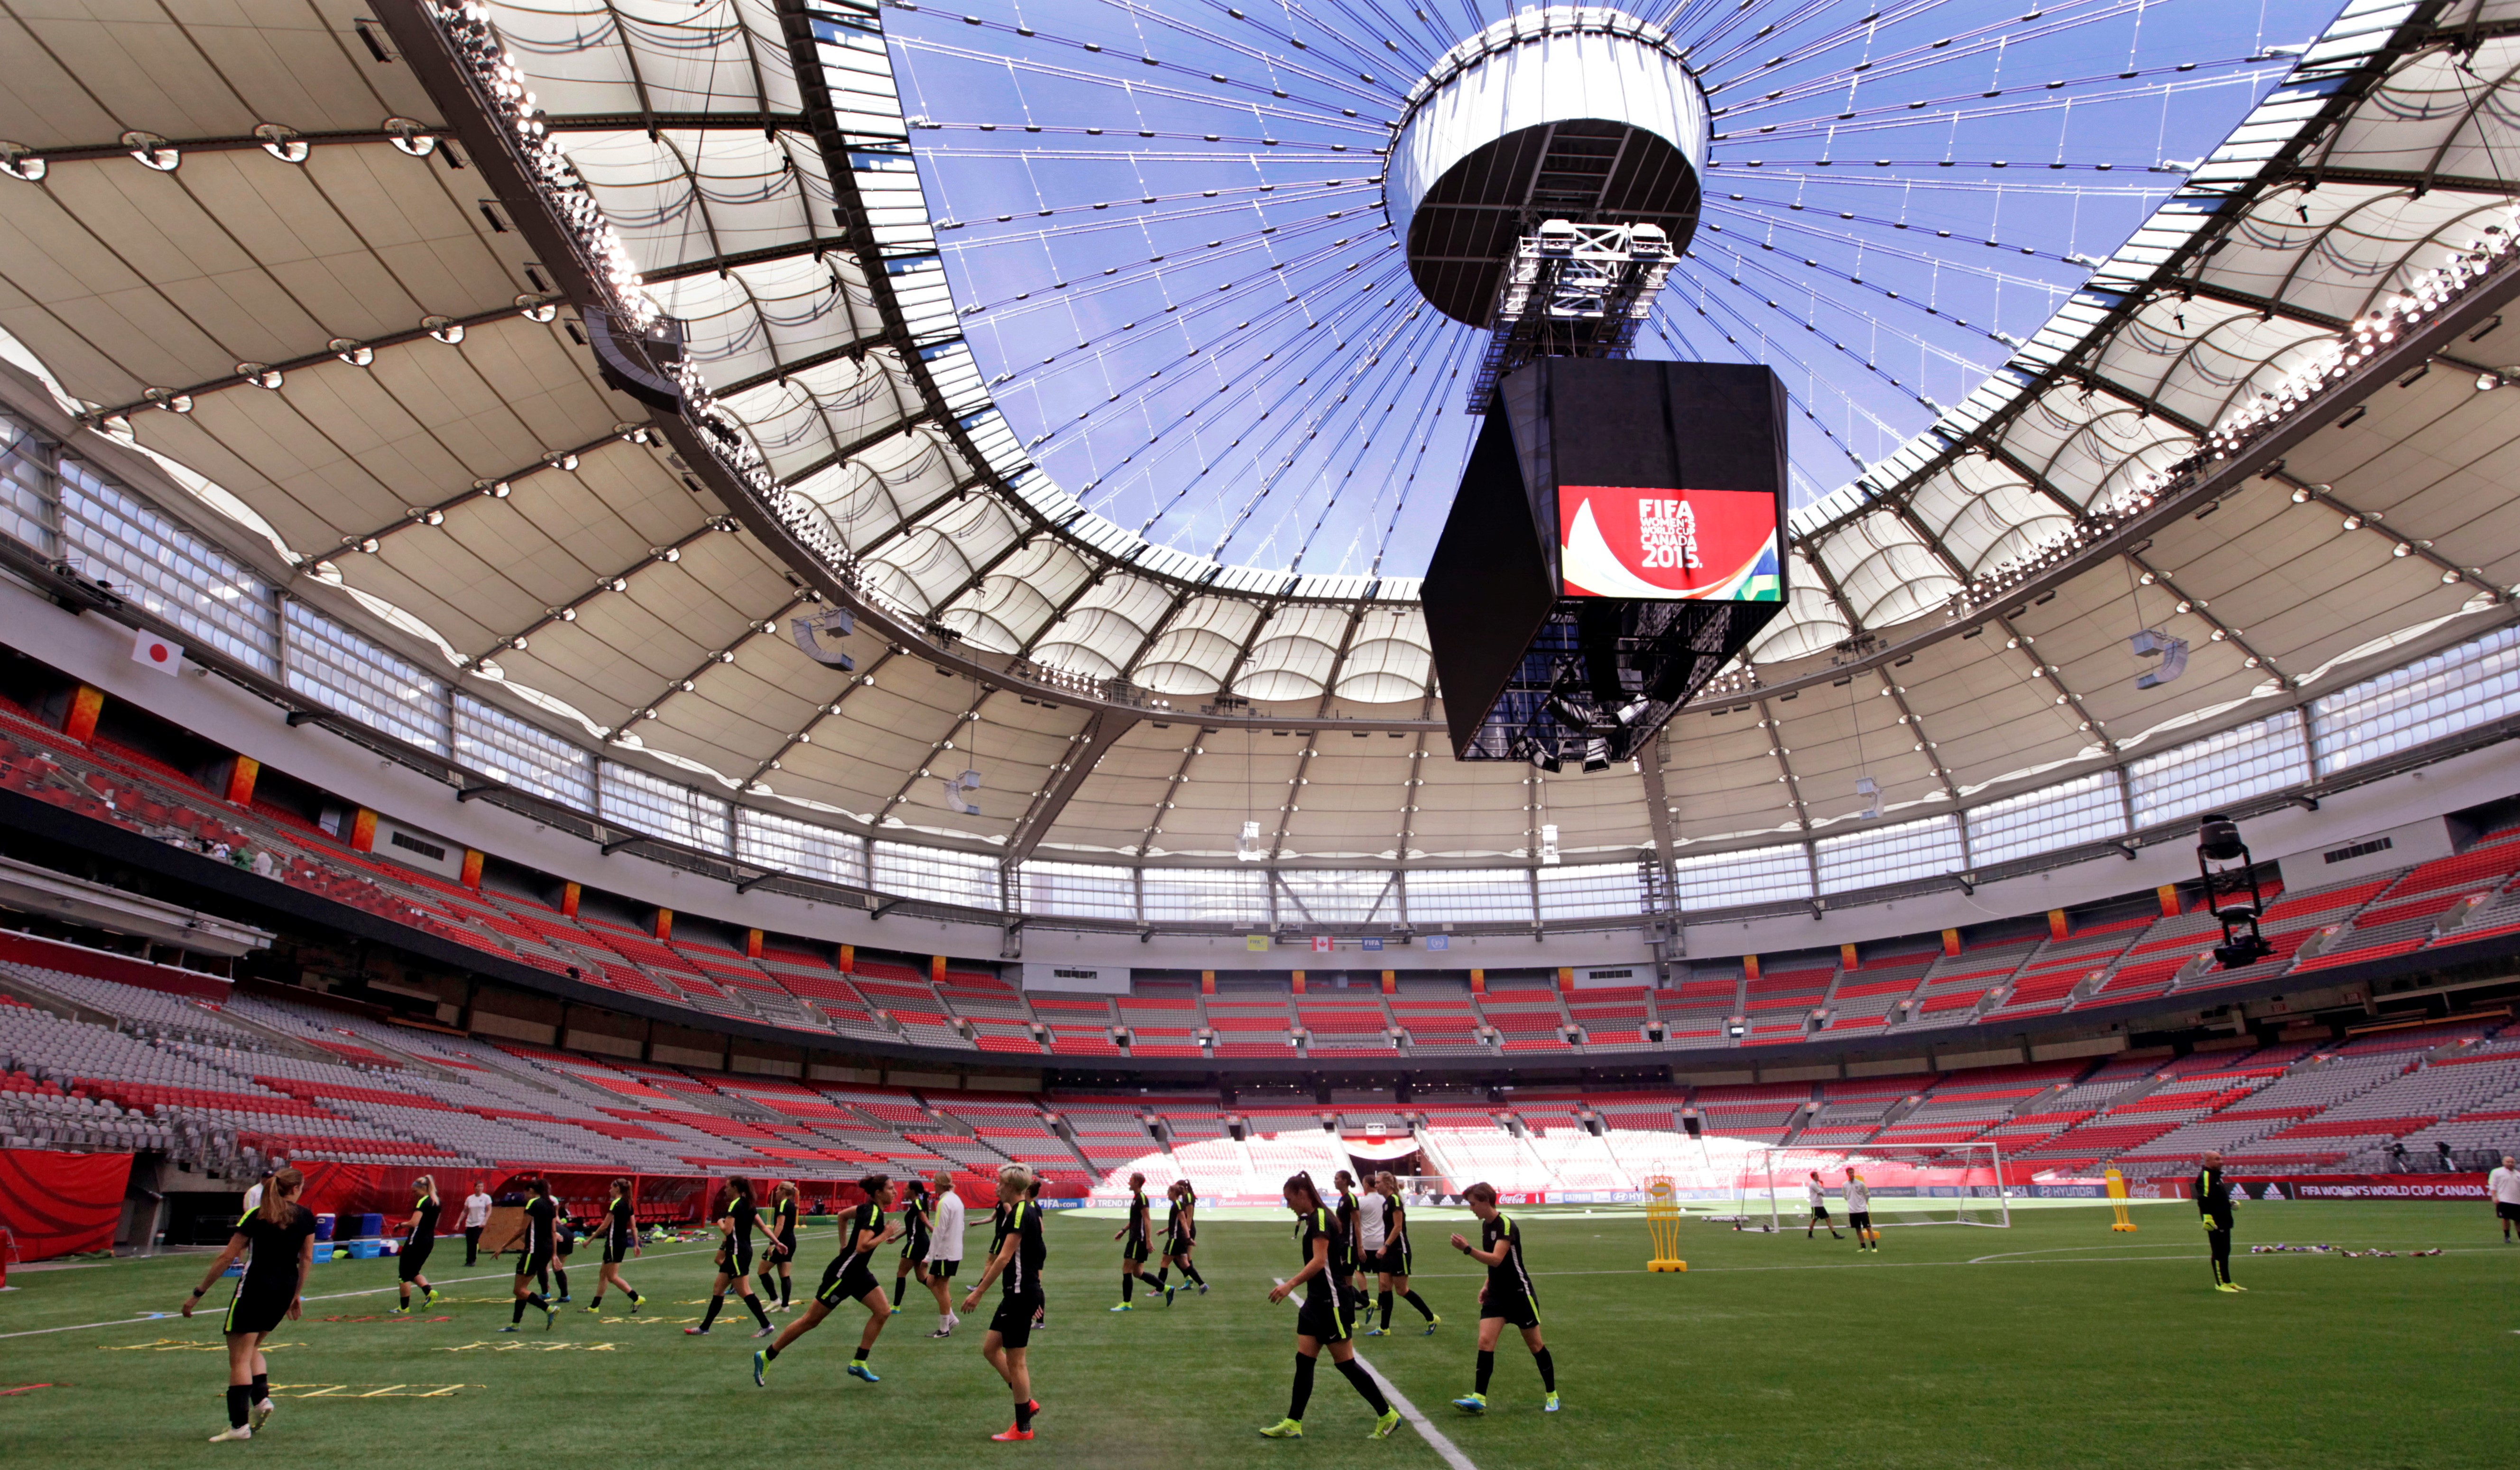 Toronto could be getting a massive FIFA-ready soccer stadium